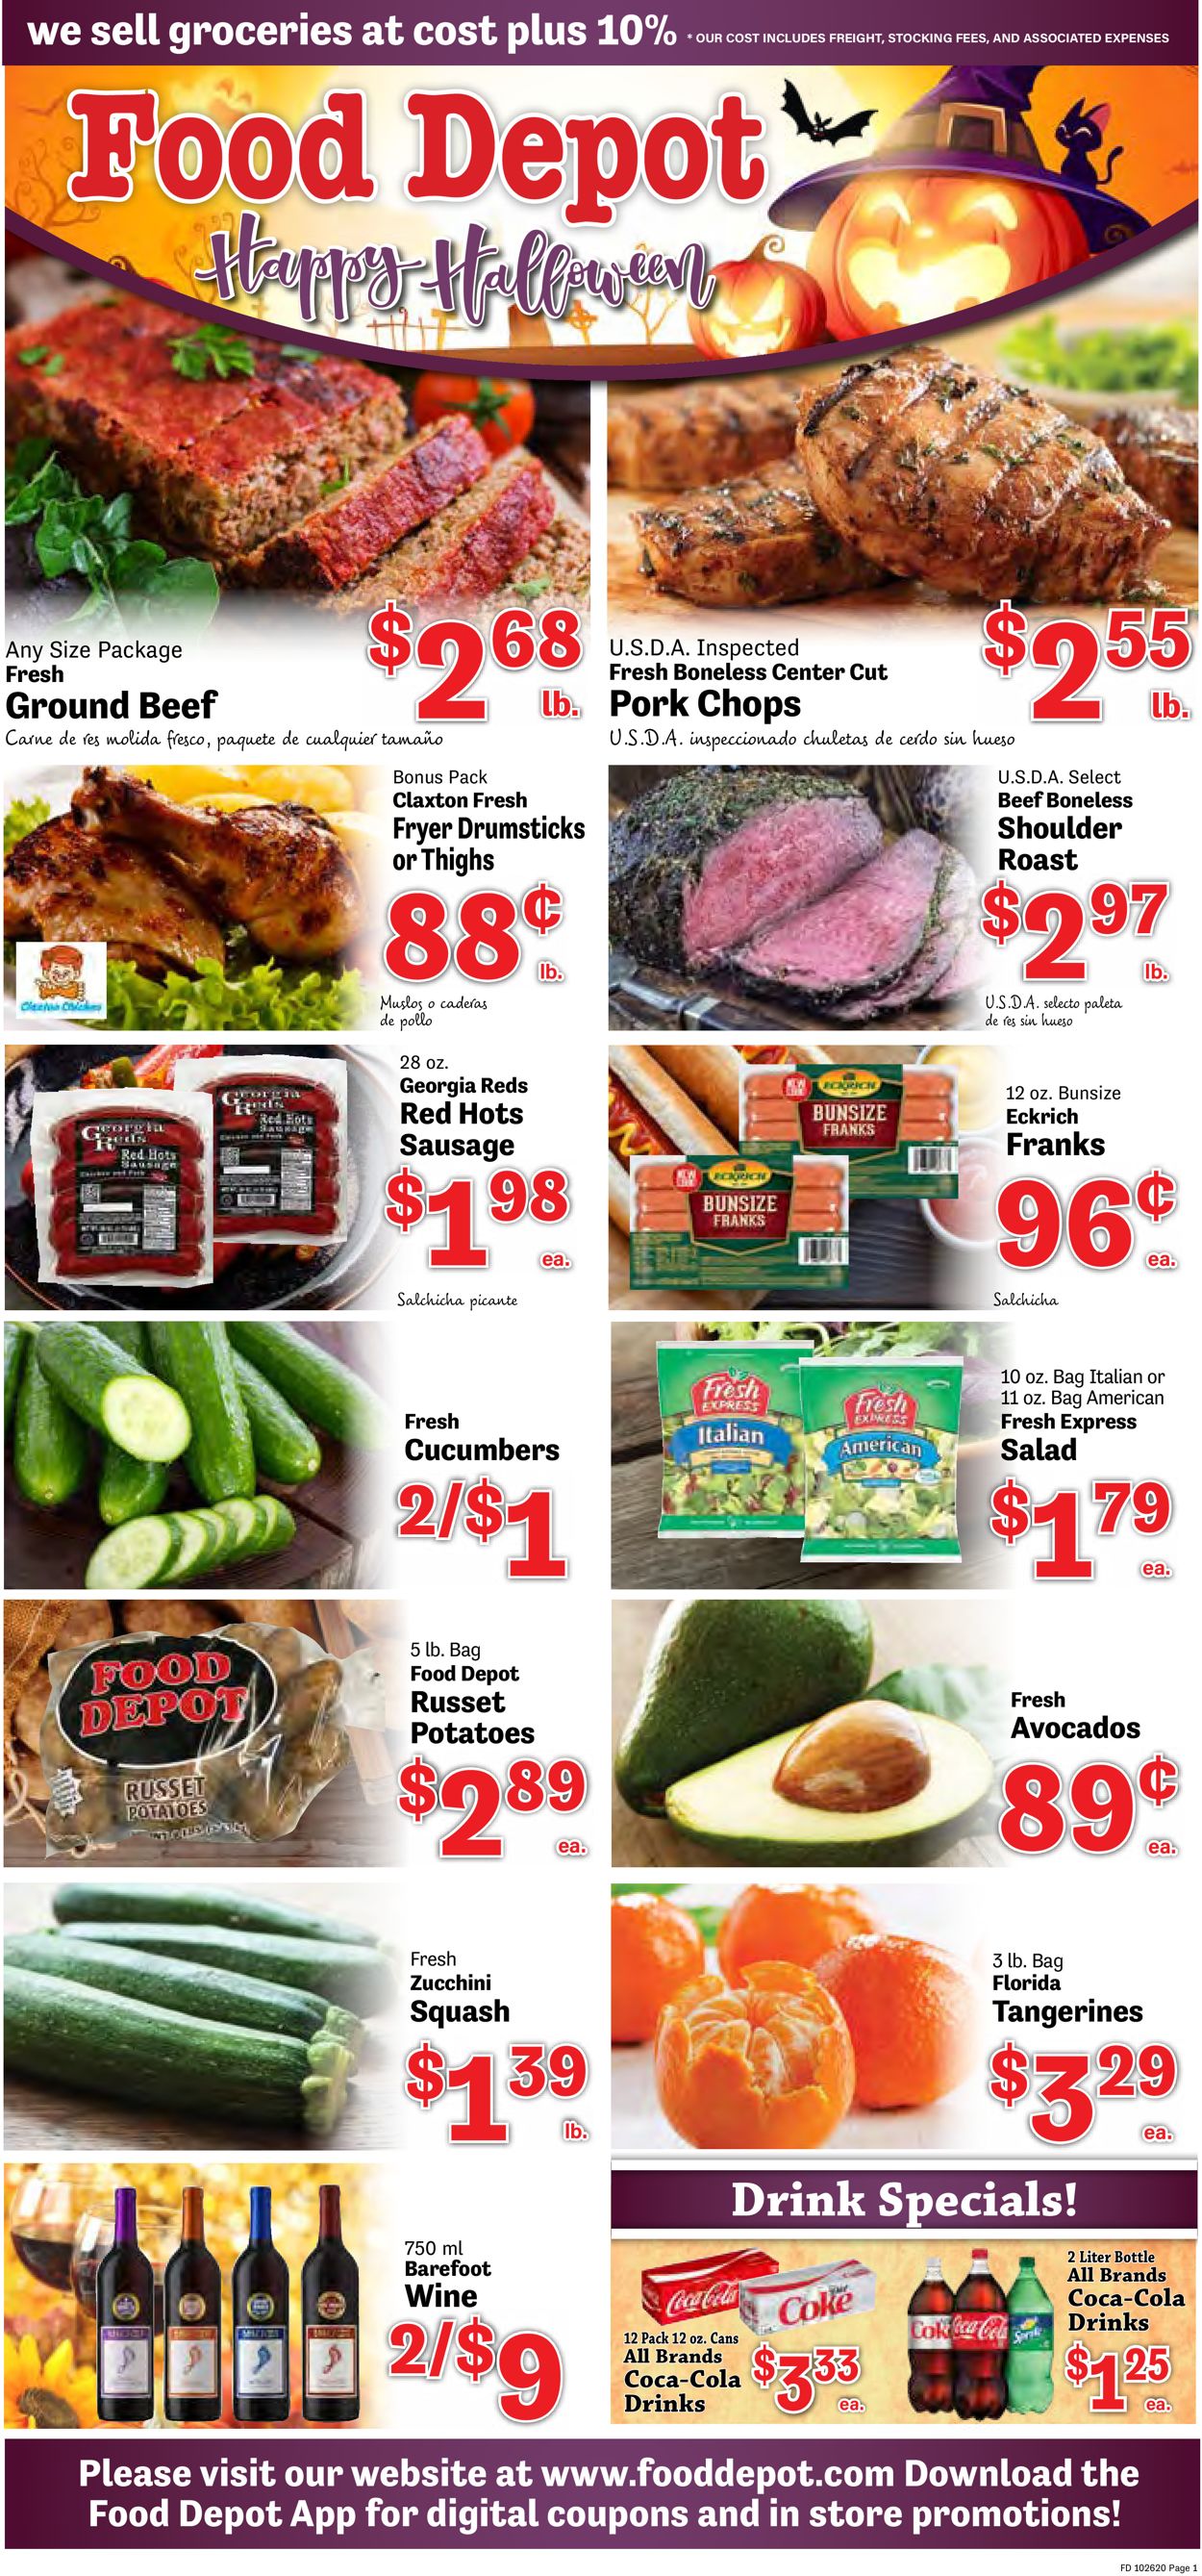 Food Depot Current weekly ad 10/26 11/01/2020 frequent ads com